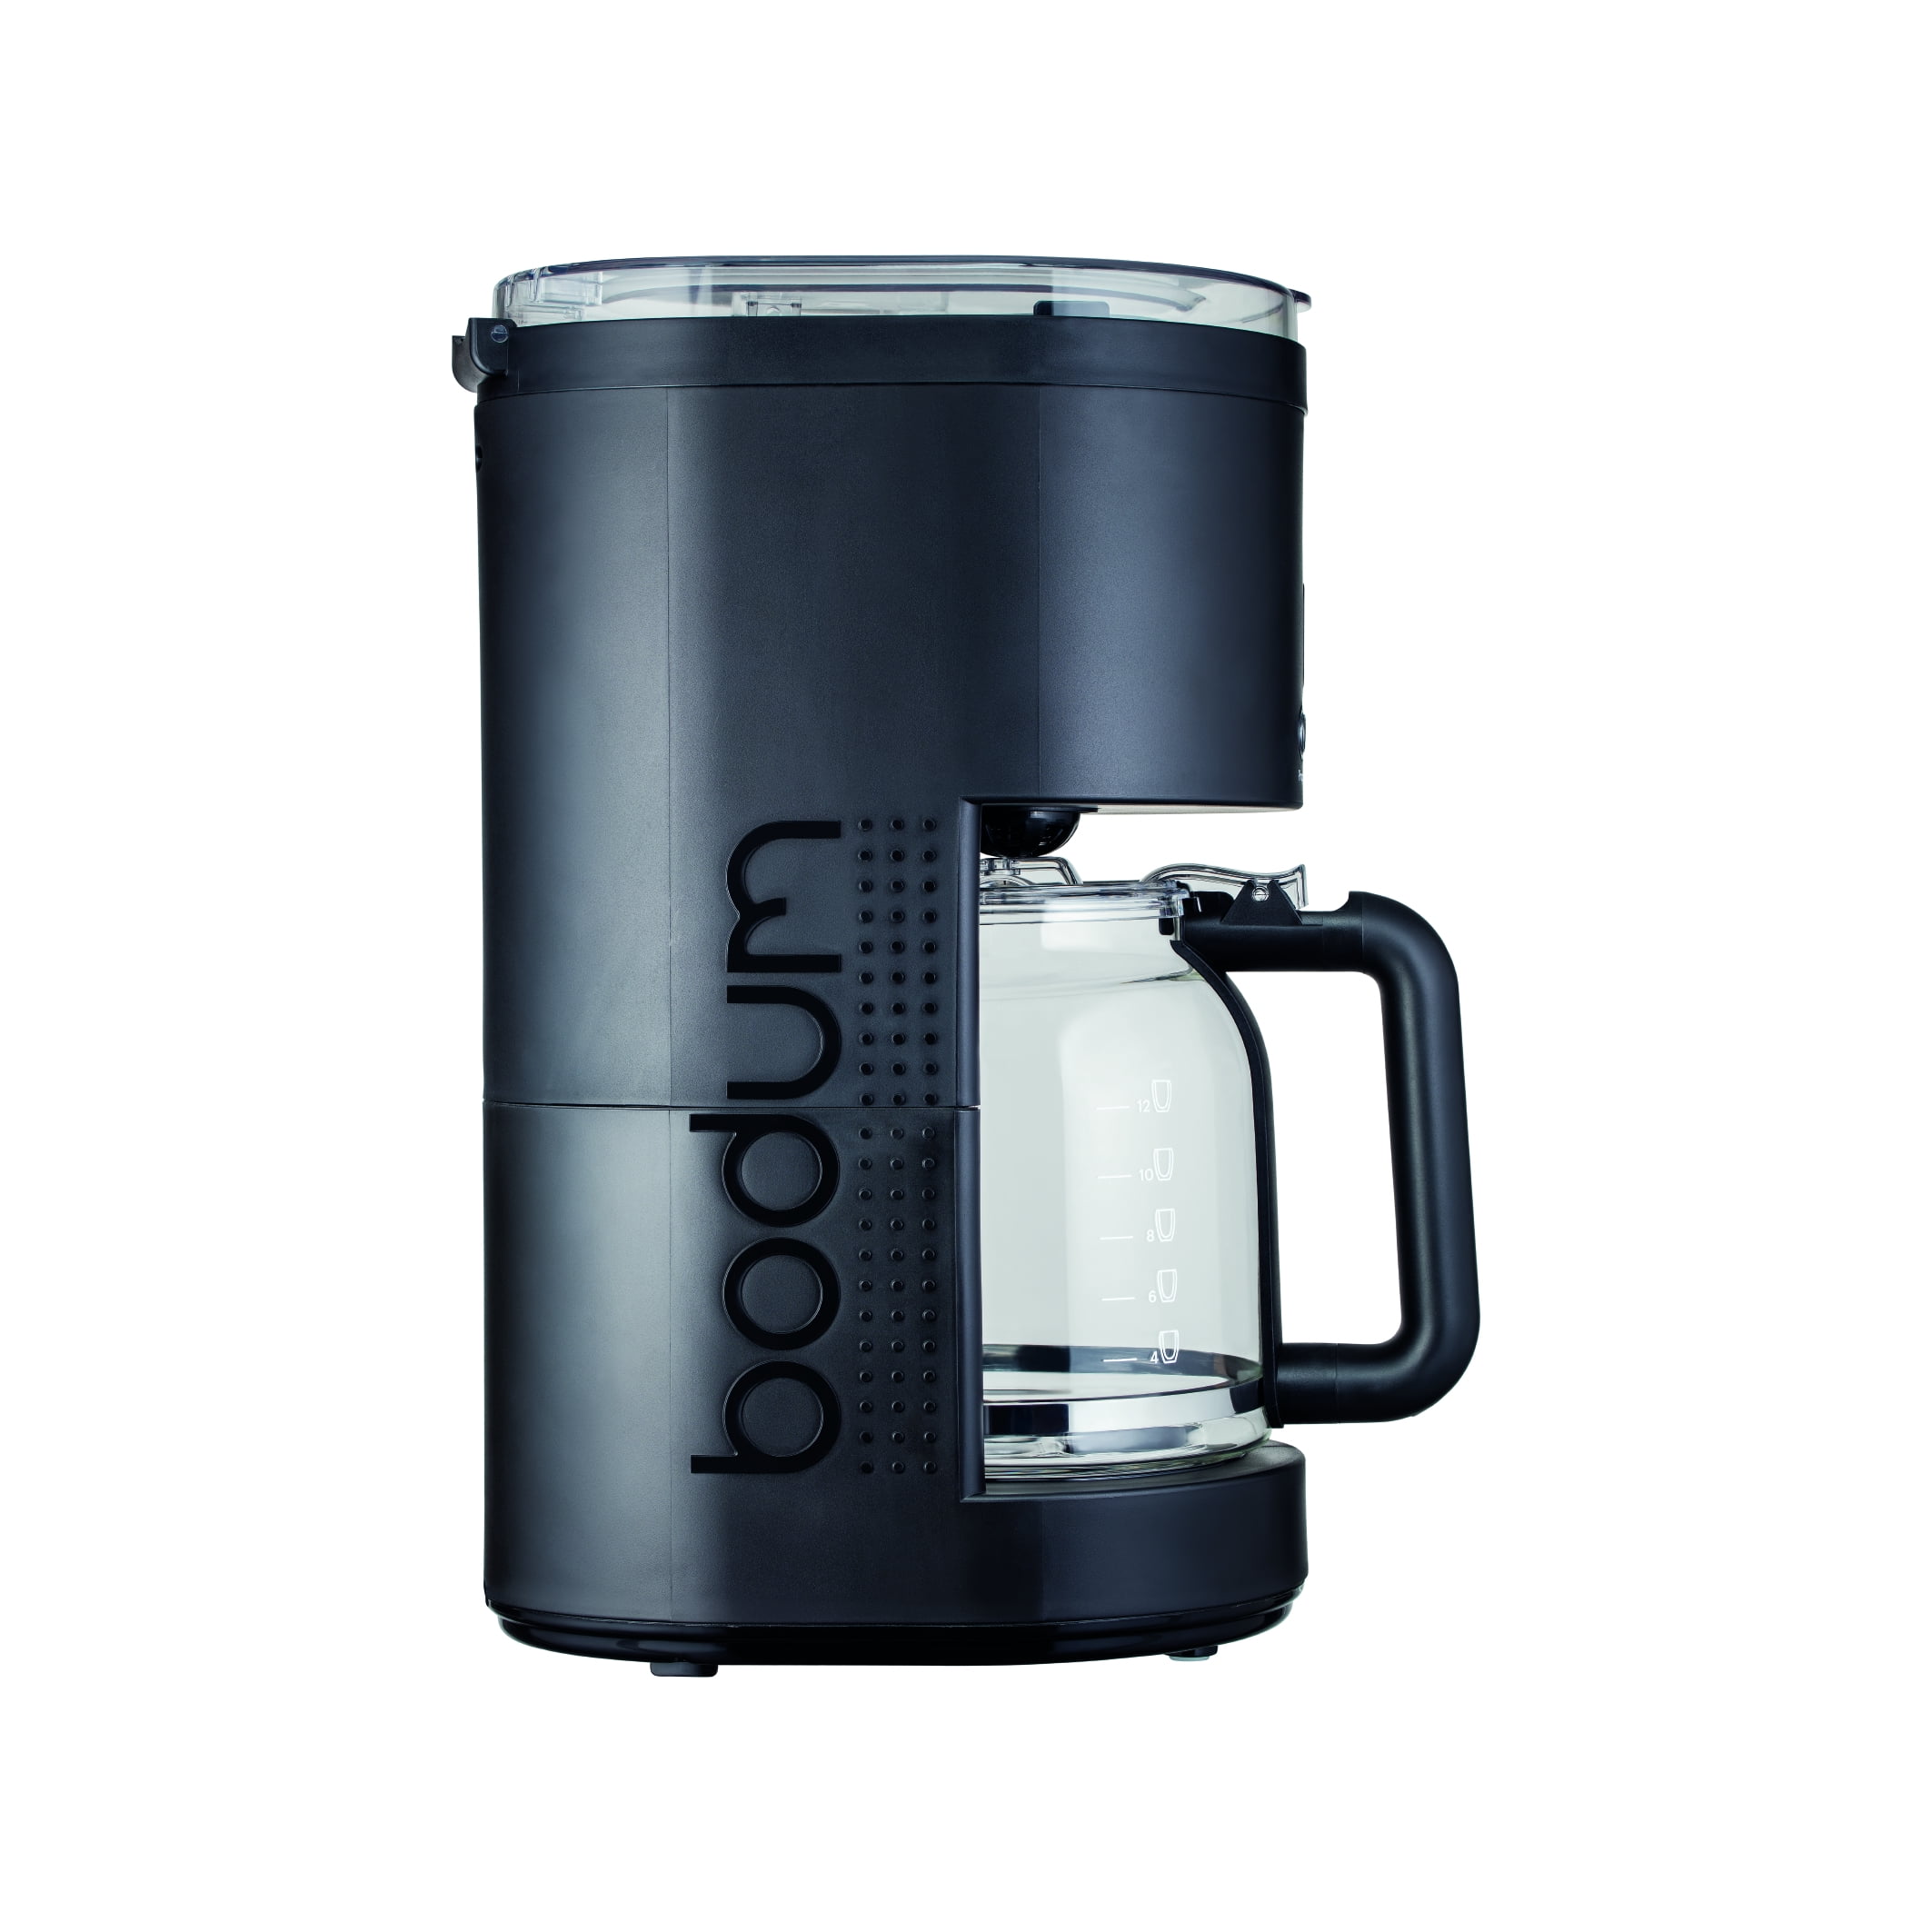 Bodum Bistro Programmable 12 Cup Coffee Maker - Stainless Steel